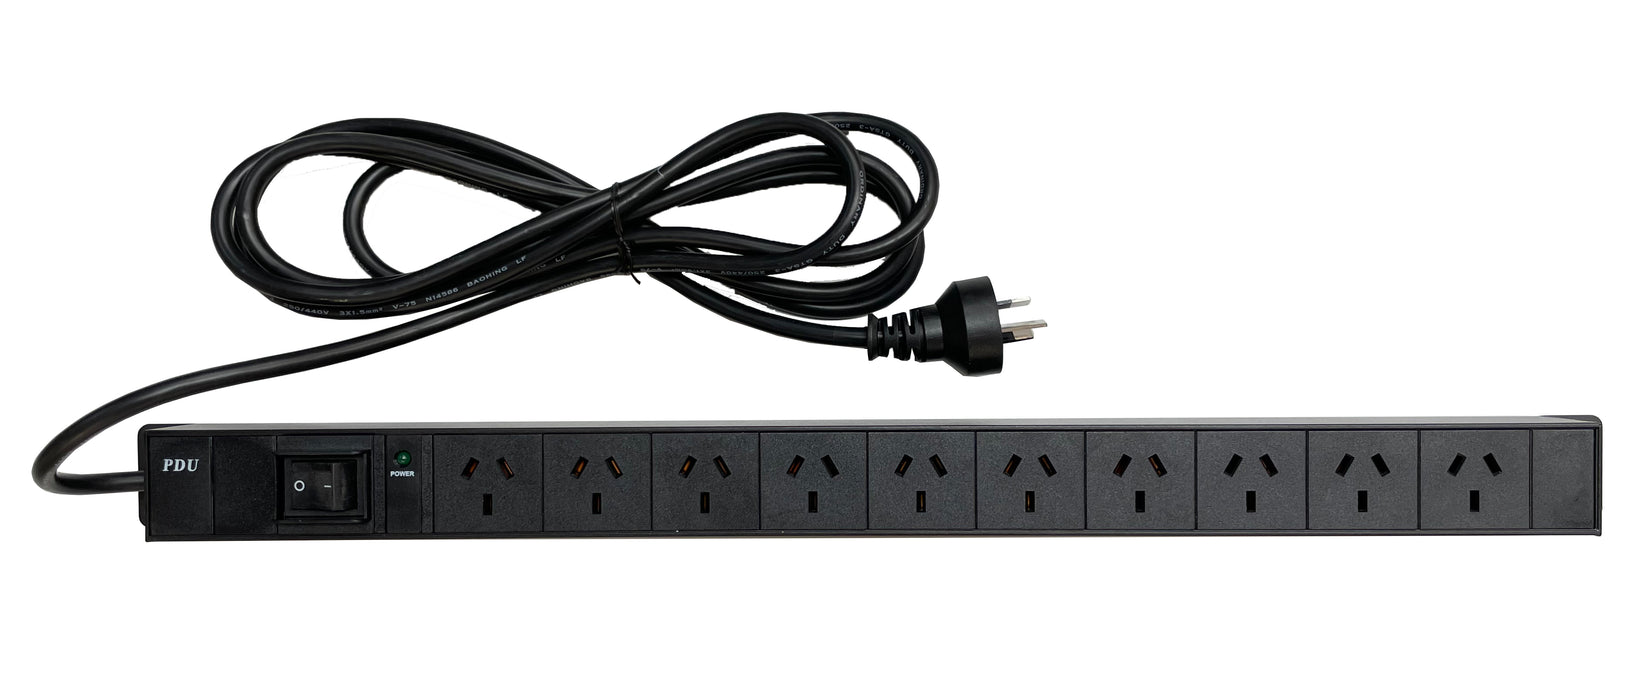 Penn Elcom - PDU-AU-10B - 10 way vertical PDU with 3m/118" mains cable with 16A power connector.